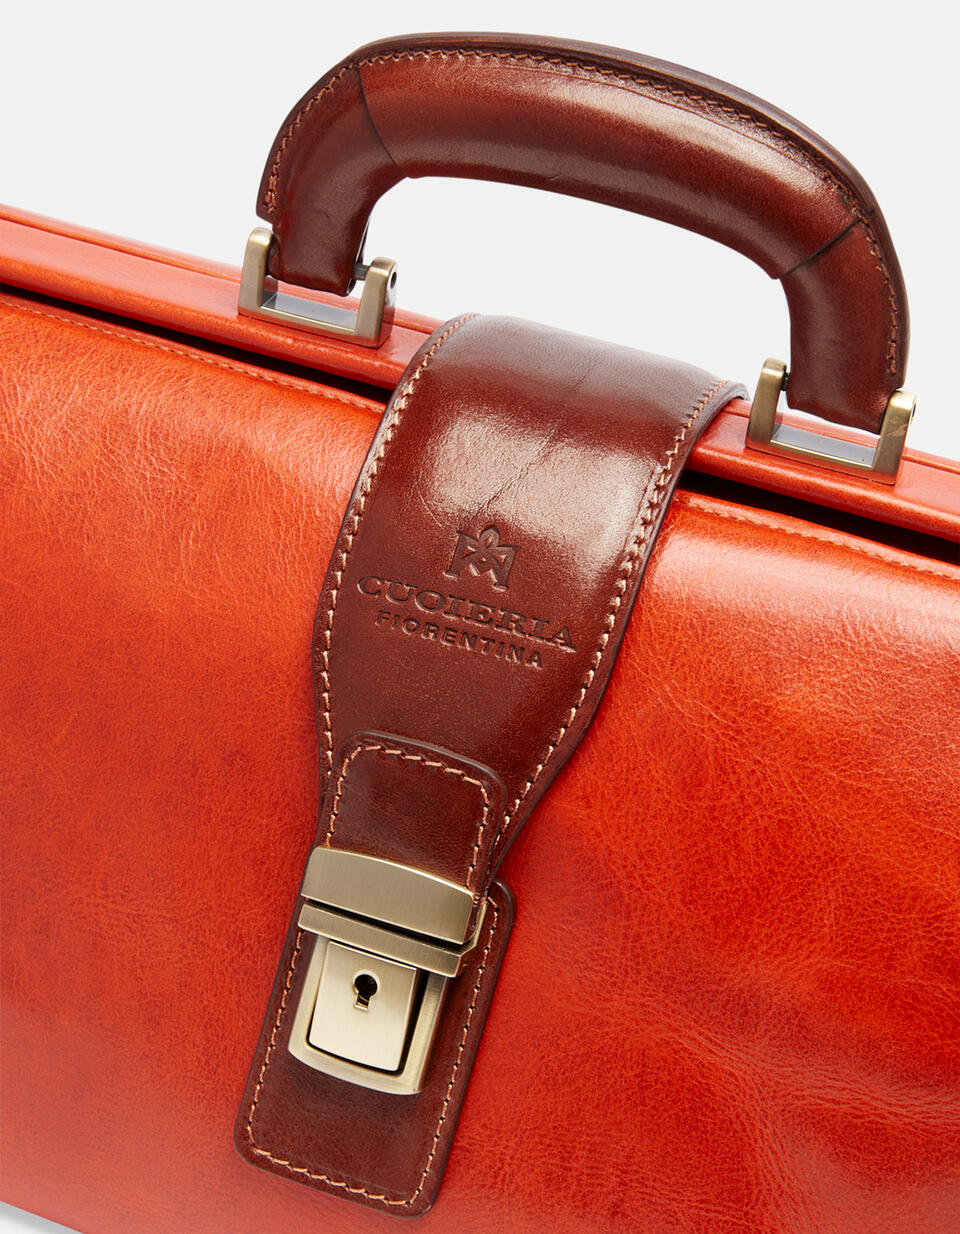 Small leather doctor's bag - Doctor Bags | Briefcases ARANCIOBICOLORE - Doctor Bags | BriefcasesCuoieria Fiorentina